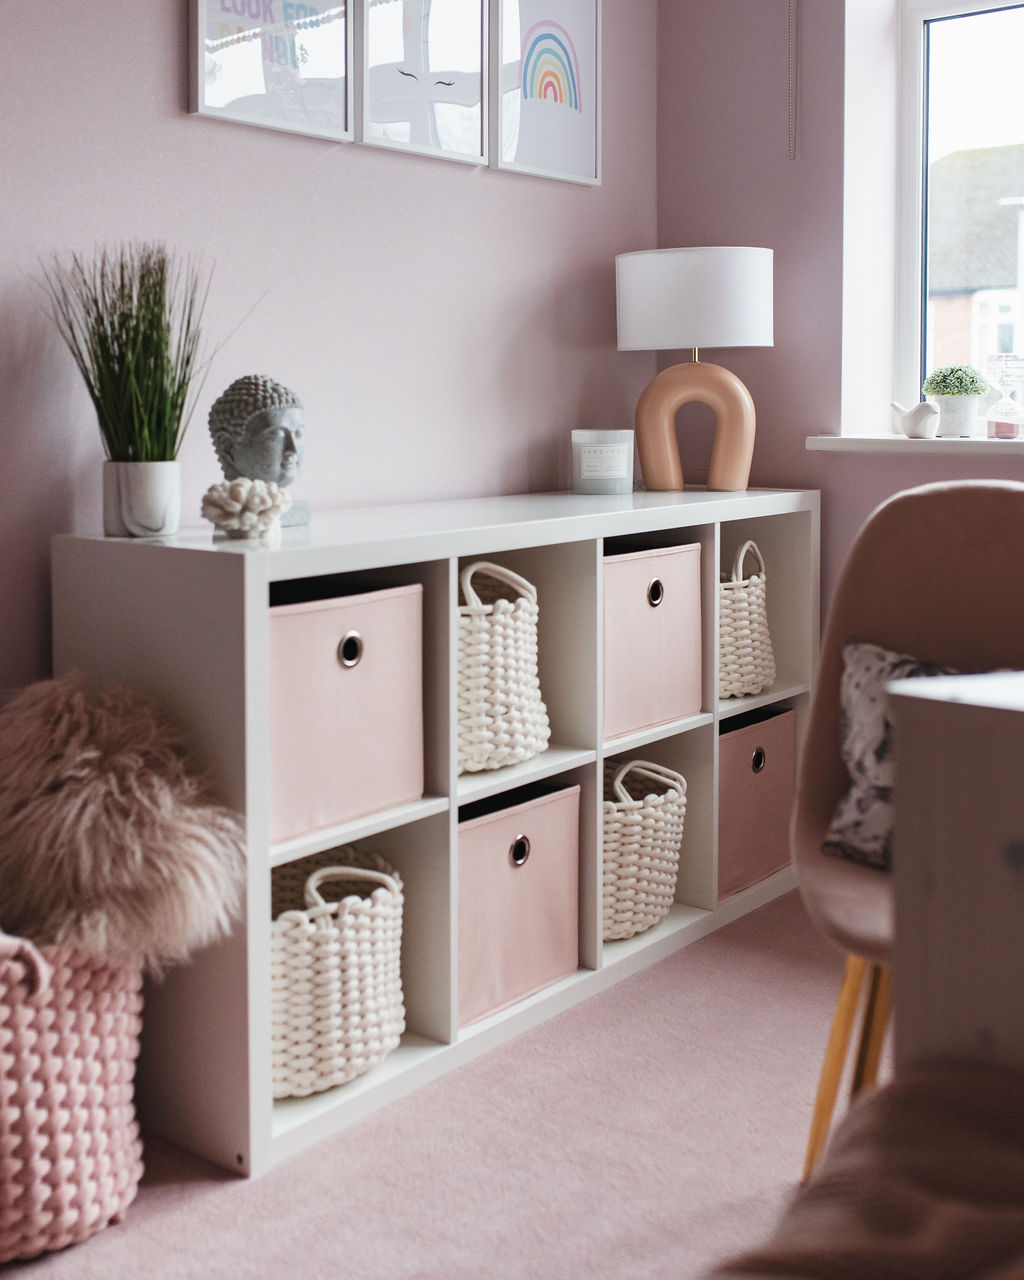 shelving unit in a girls bedroom with pink storage boxes